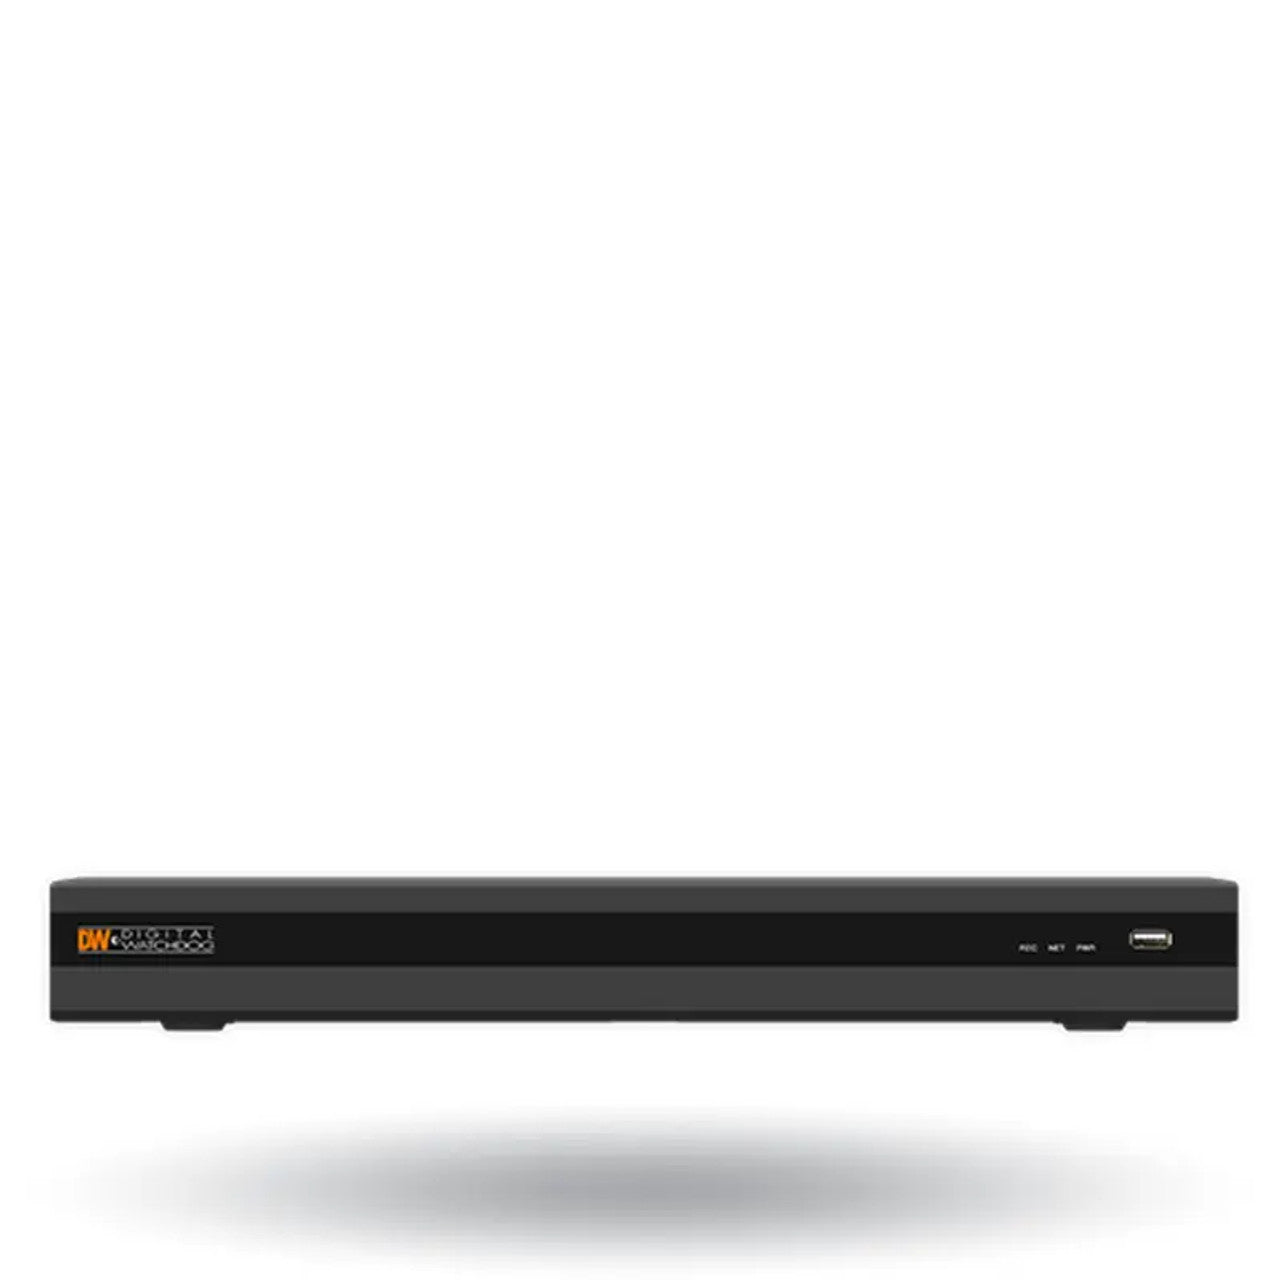 Digital Watchdog DW-VG41212T8P VMAX IP G4 8 Channel PoE NVR with 4 bonus channels with 12TB Hard Drive, 12-Channel